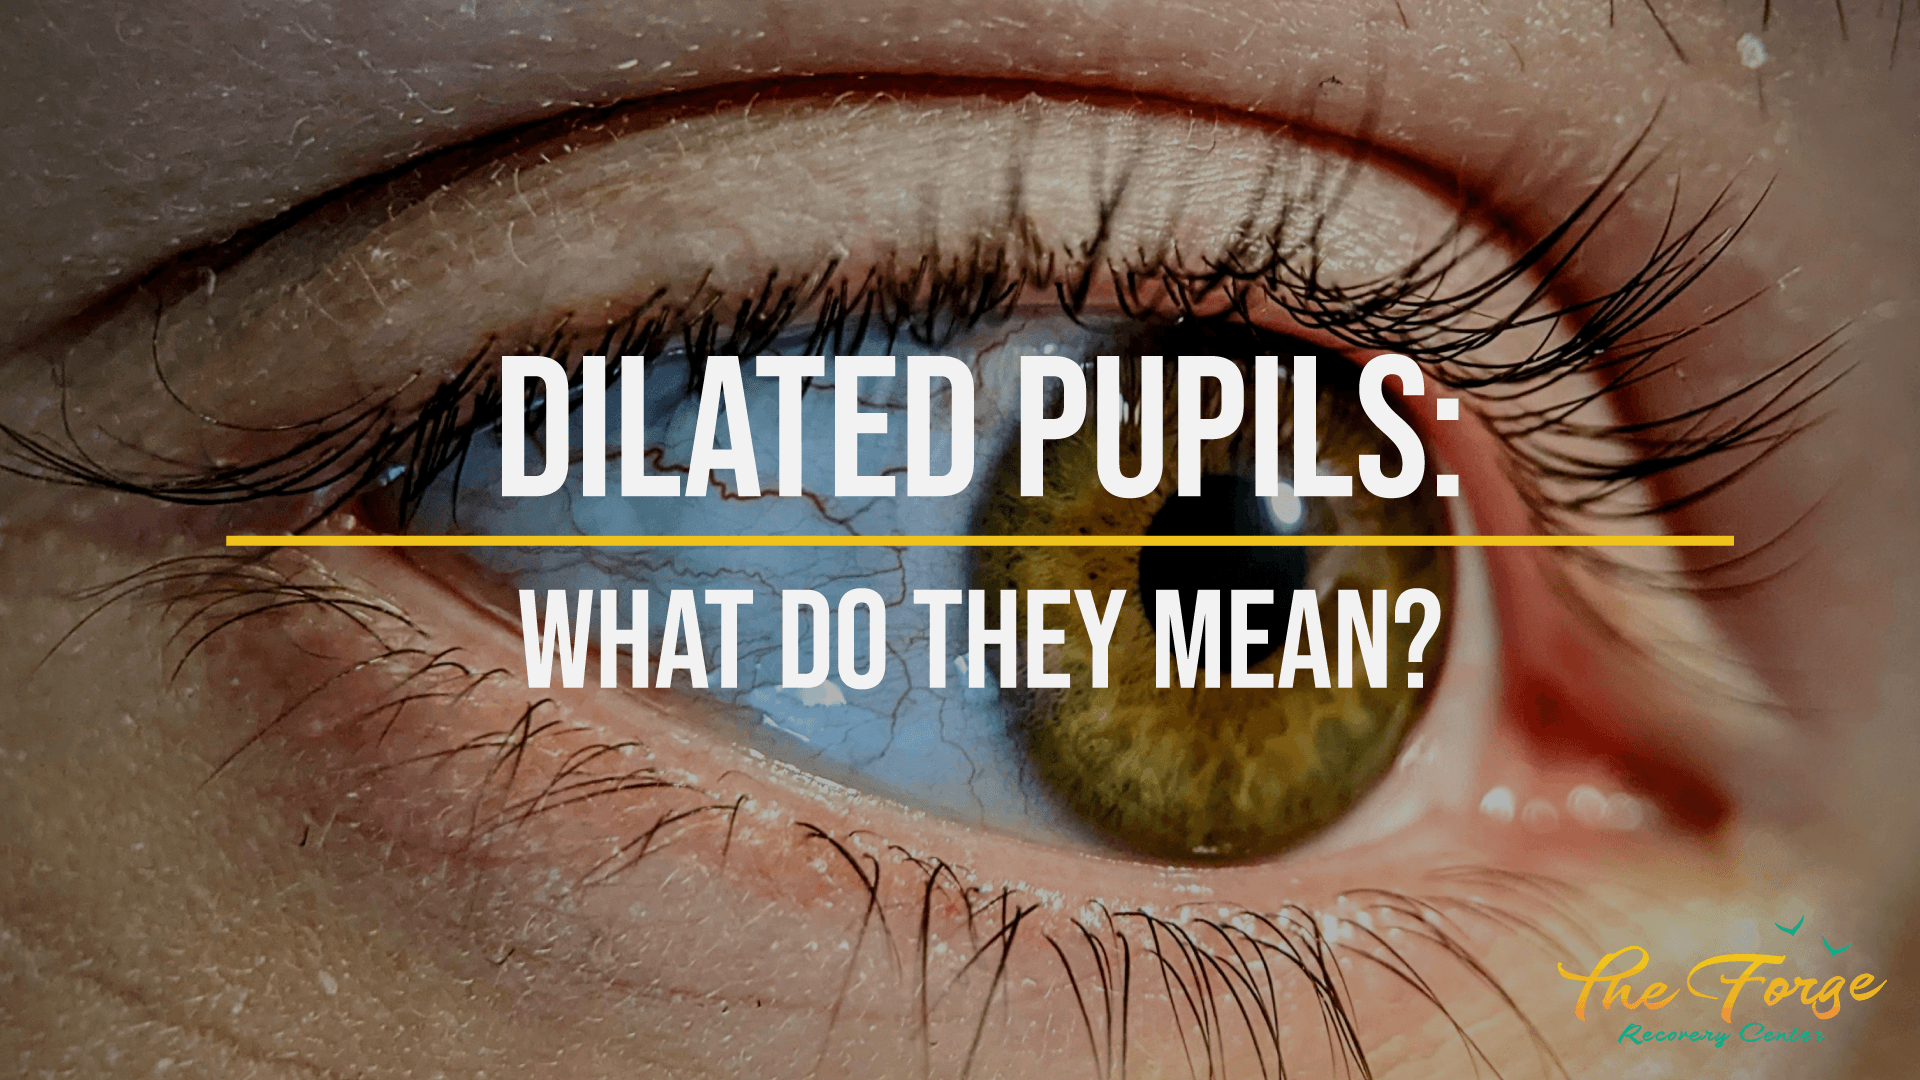 What Are Dilated Pupils?